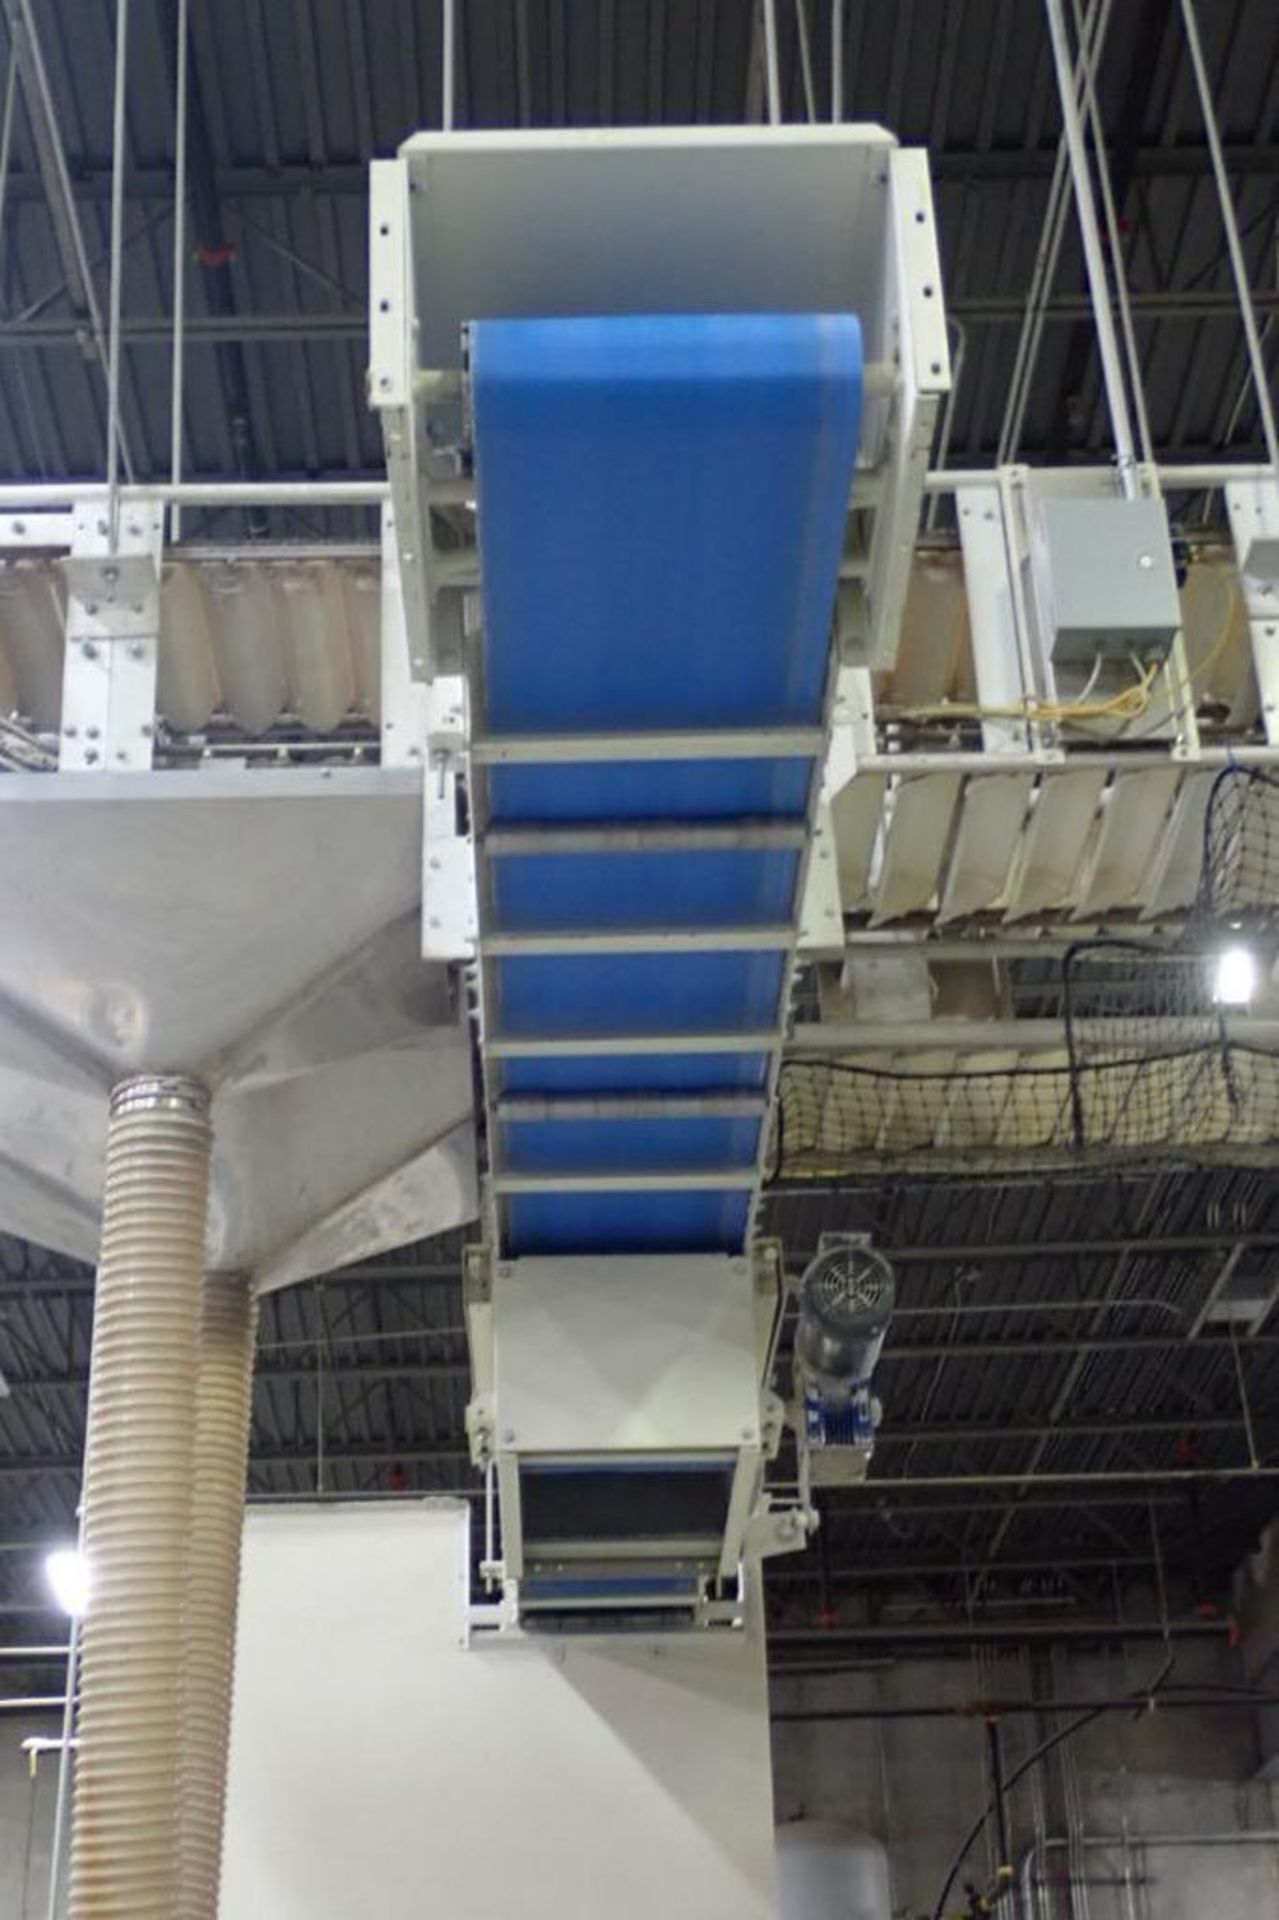 Rapat infeed conveyor, 20 ft. long x 24 in. wide, blue belt, motor and drive, suspended from ceiling - Image 4 of 4